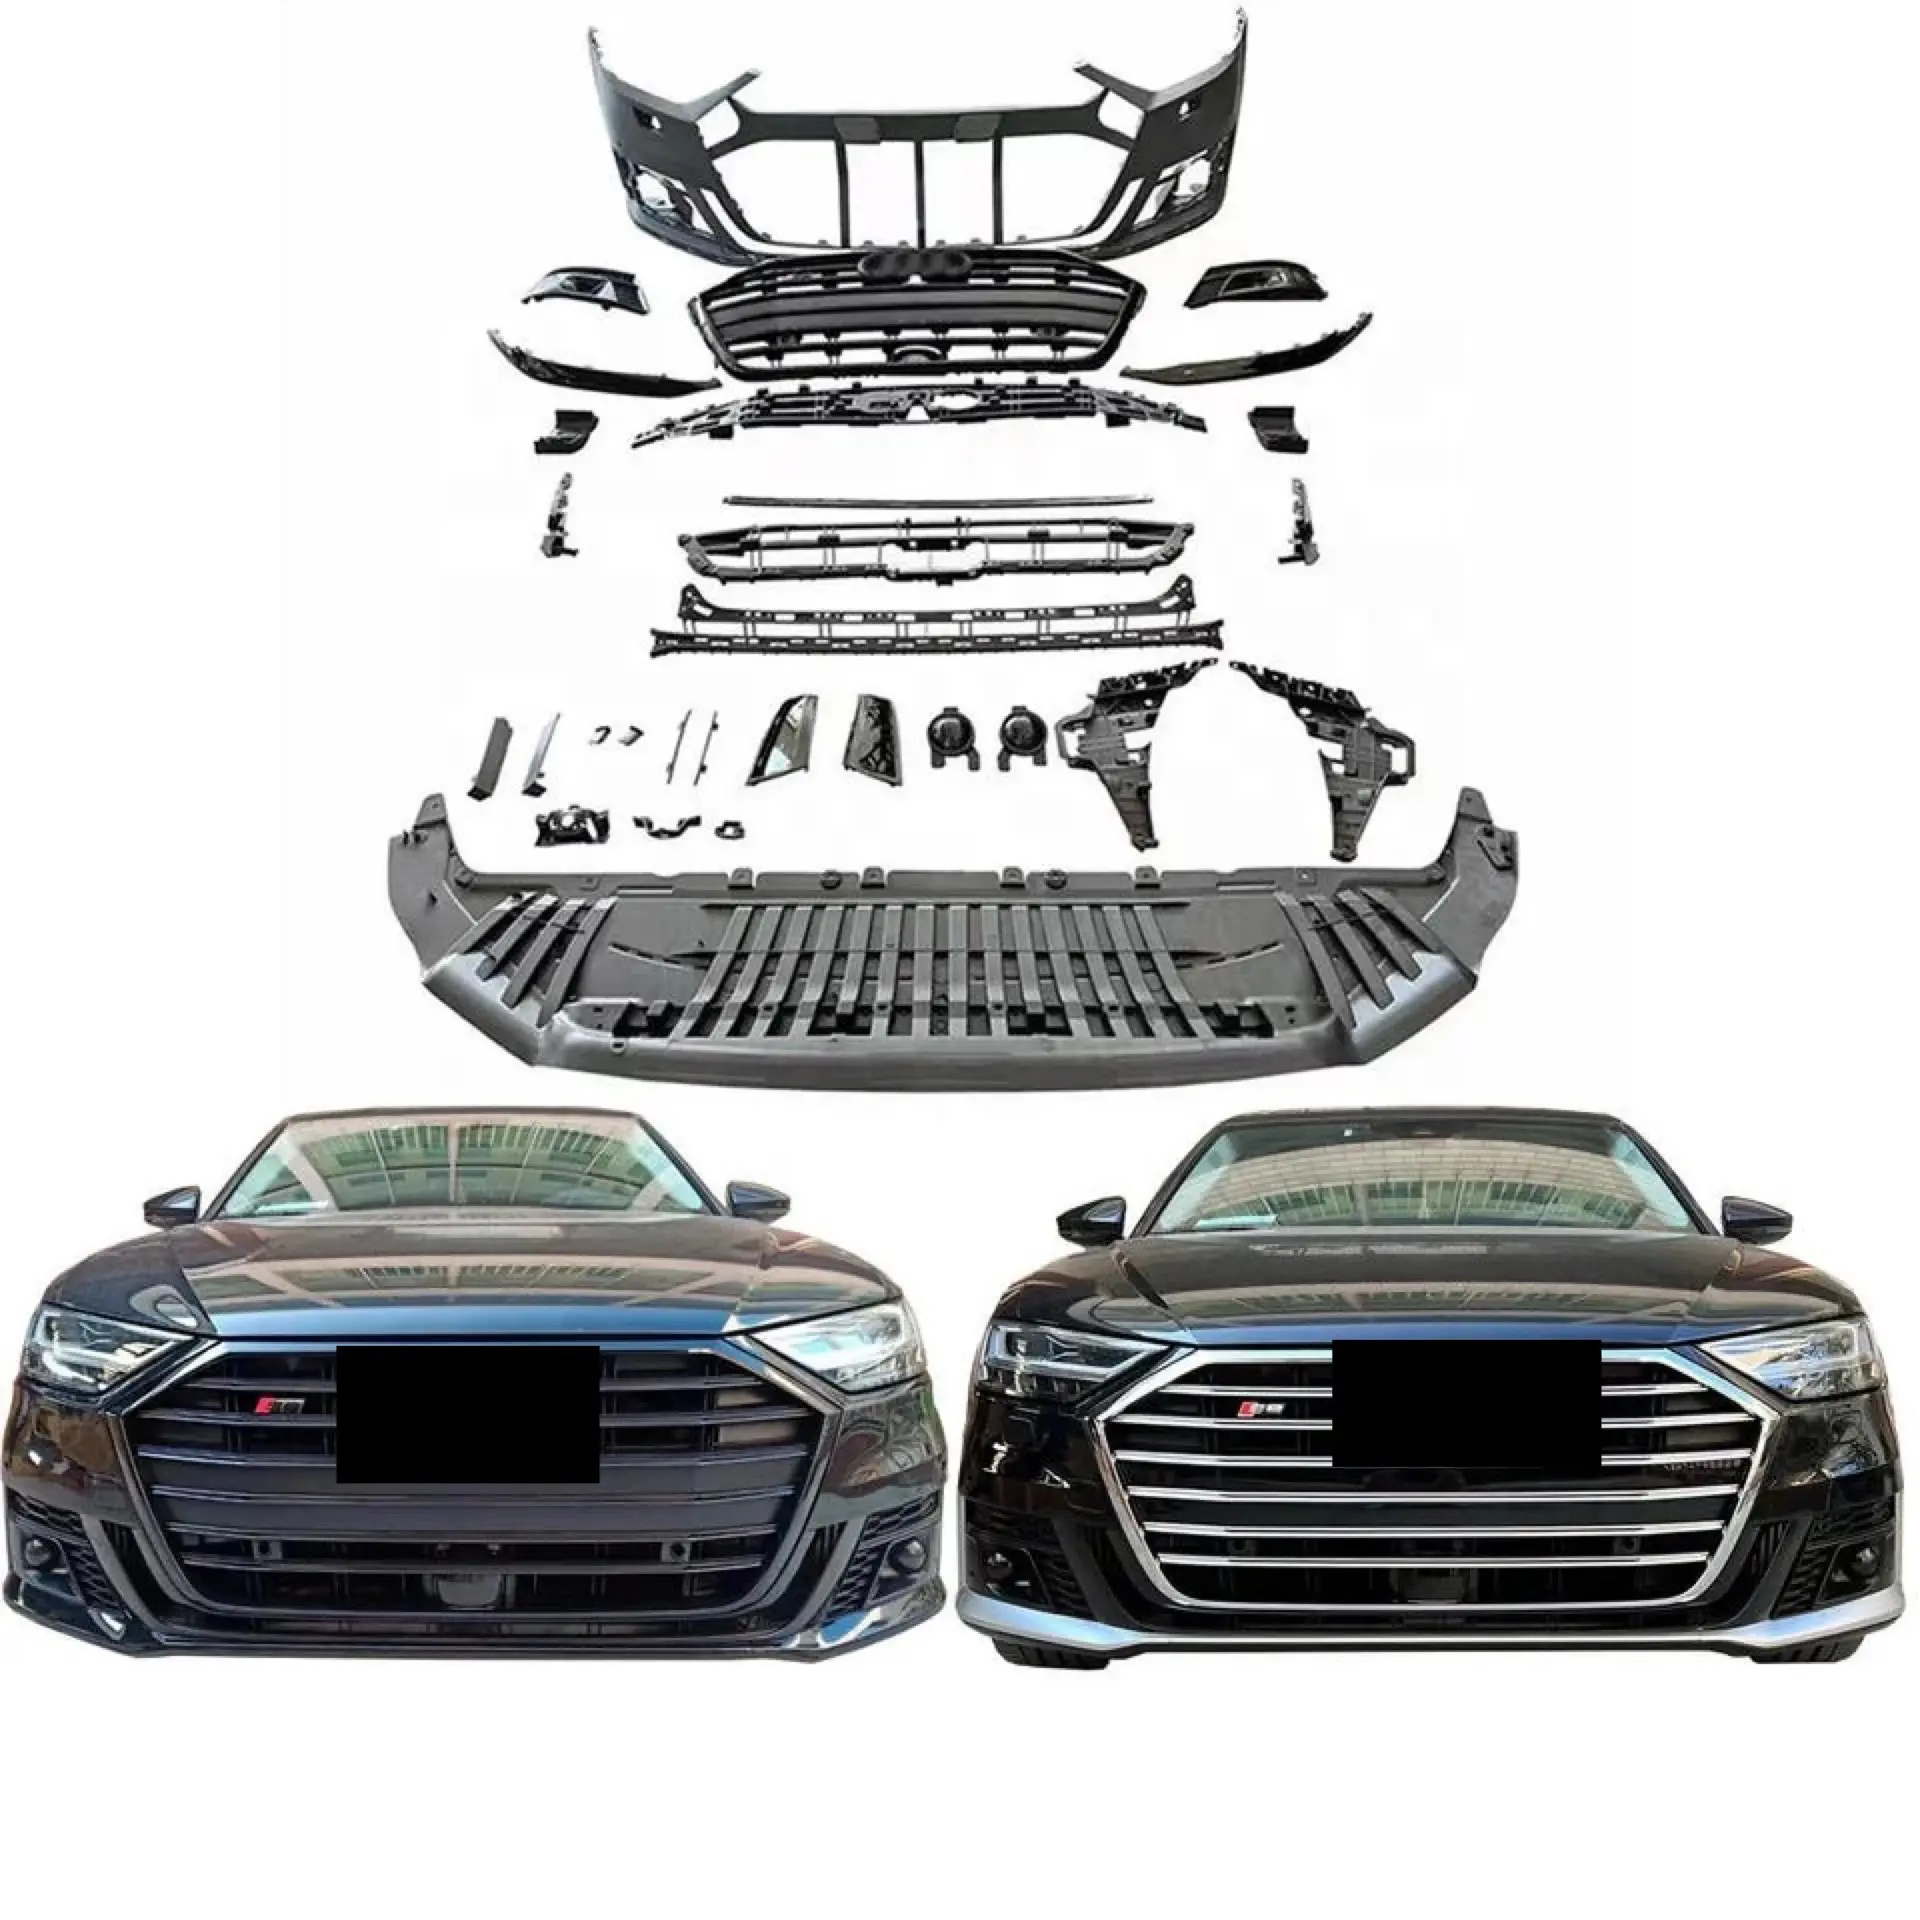 Factory direct A8 body kit front and rear bumper modifications and rear diffuser for Audi